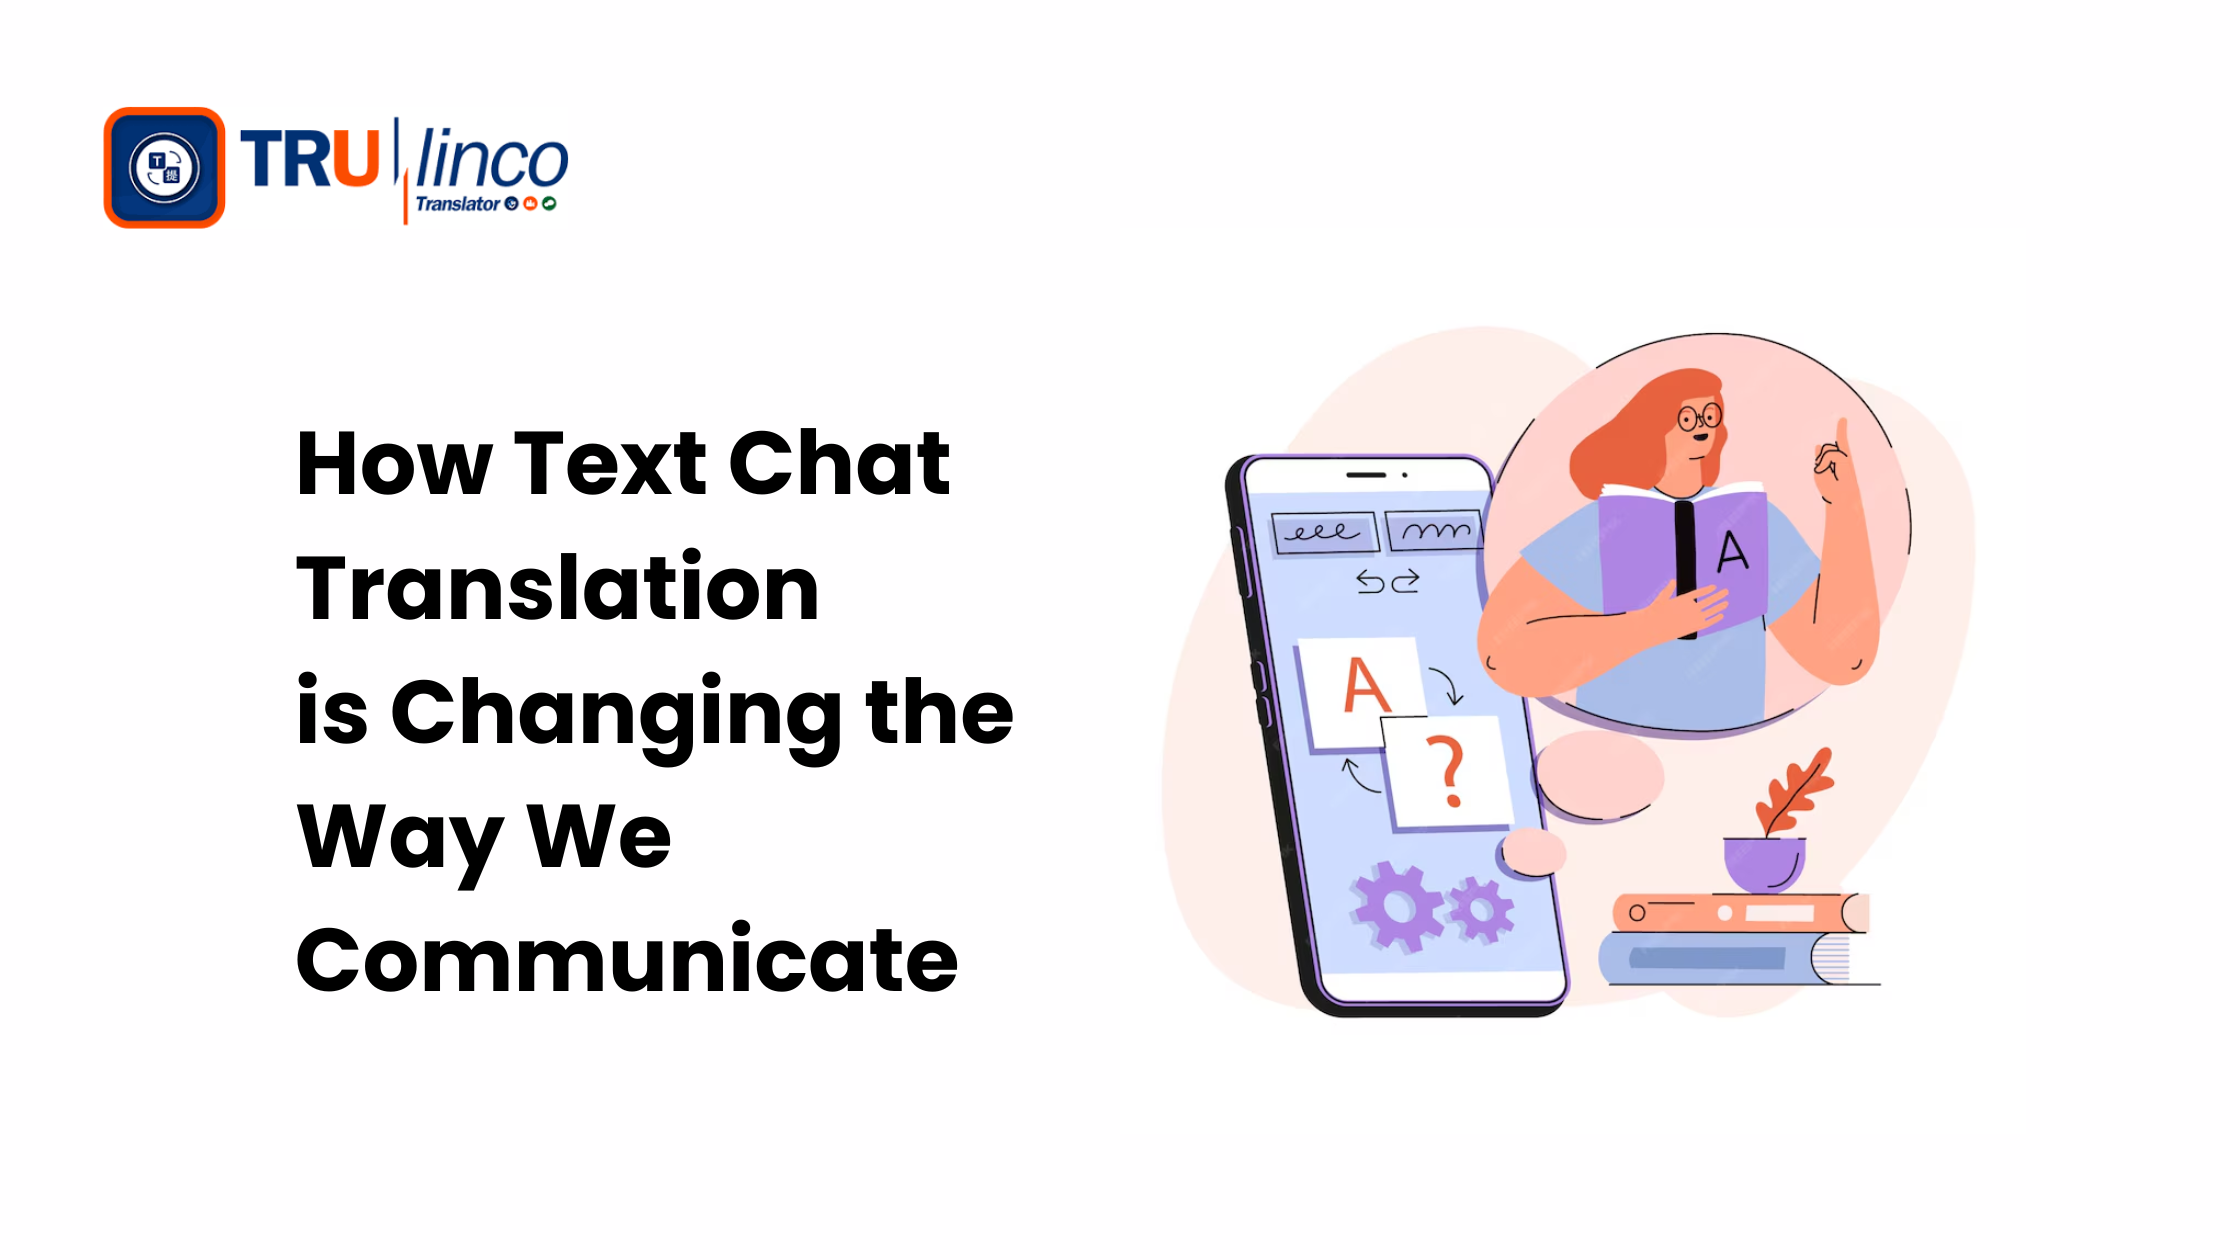 How Text Chat Translation is Changing the Way We Communicate